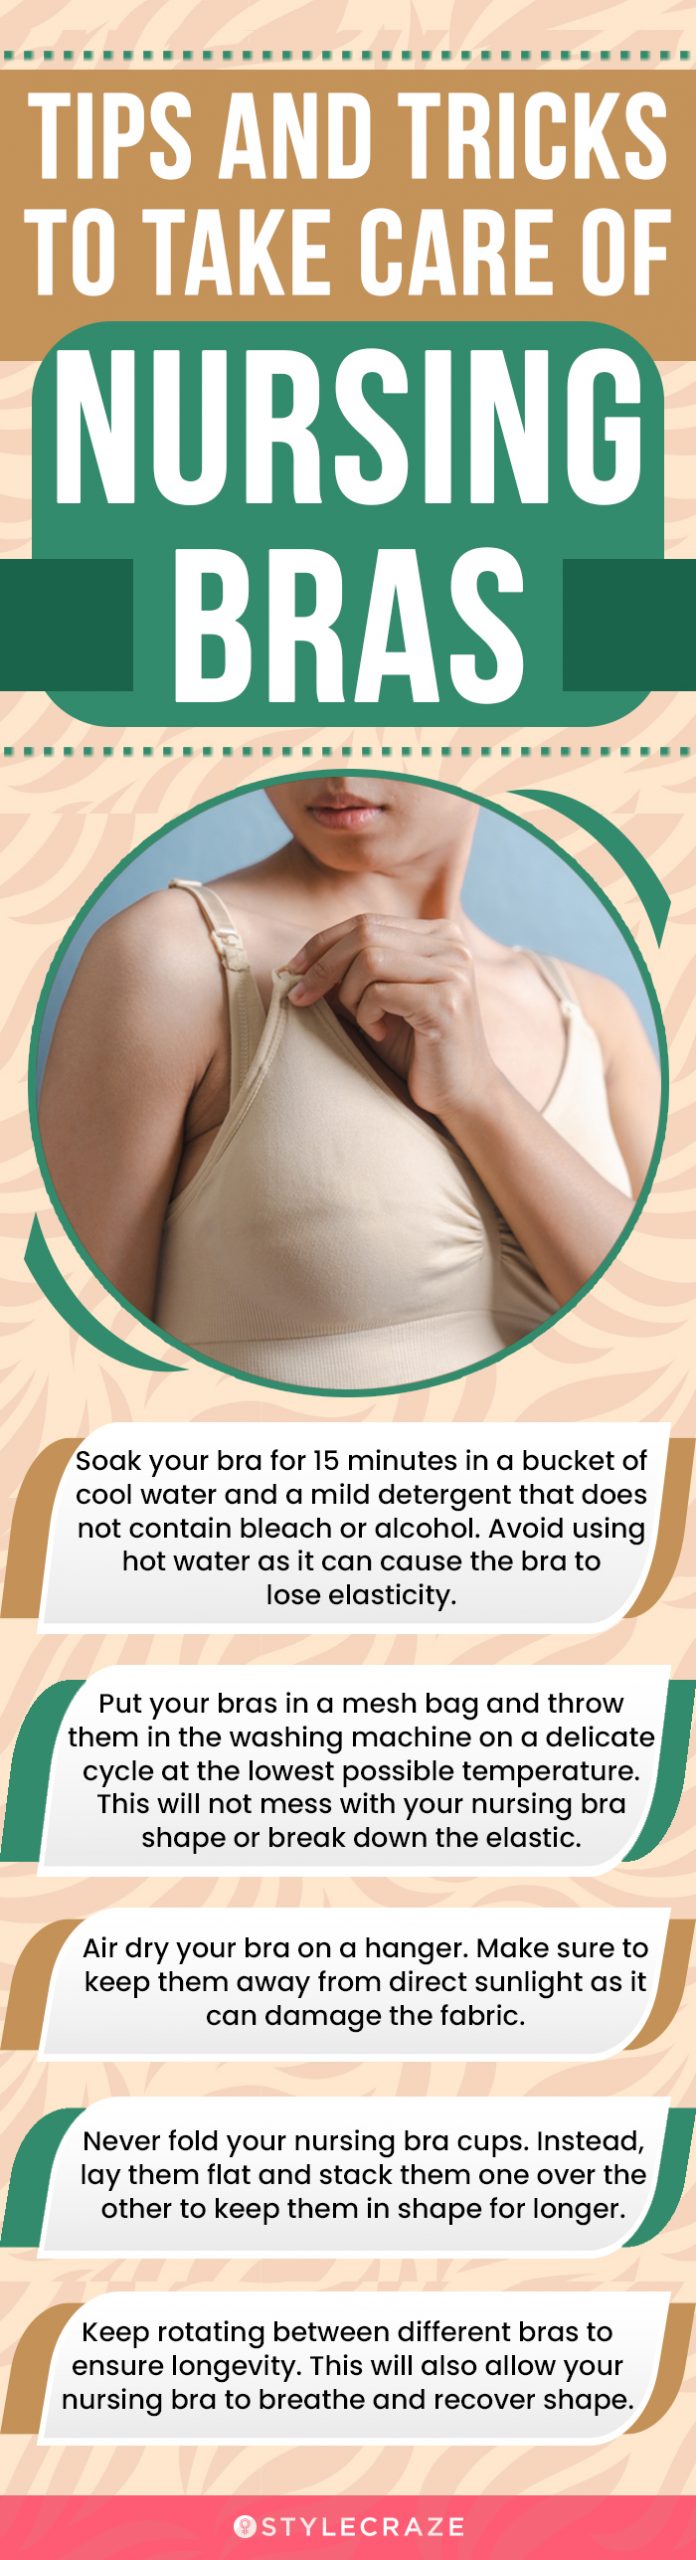 Tips And Tricks To Take Care Of Nursing Bras (infographic)